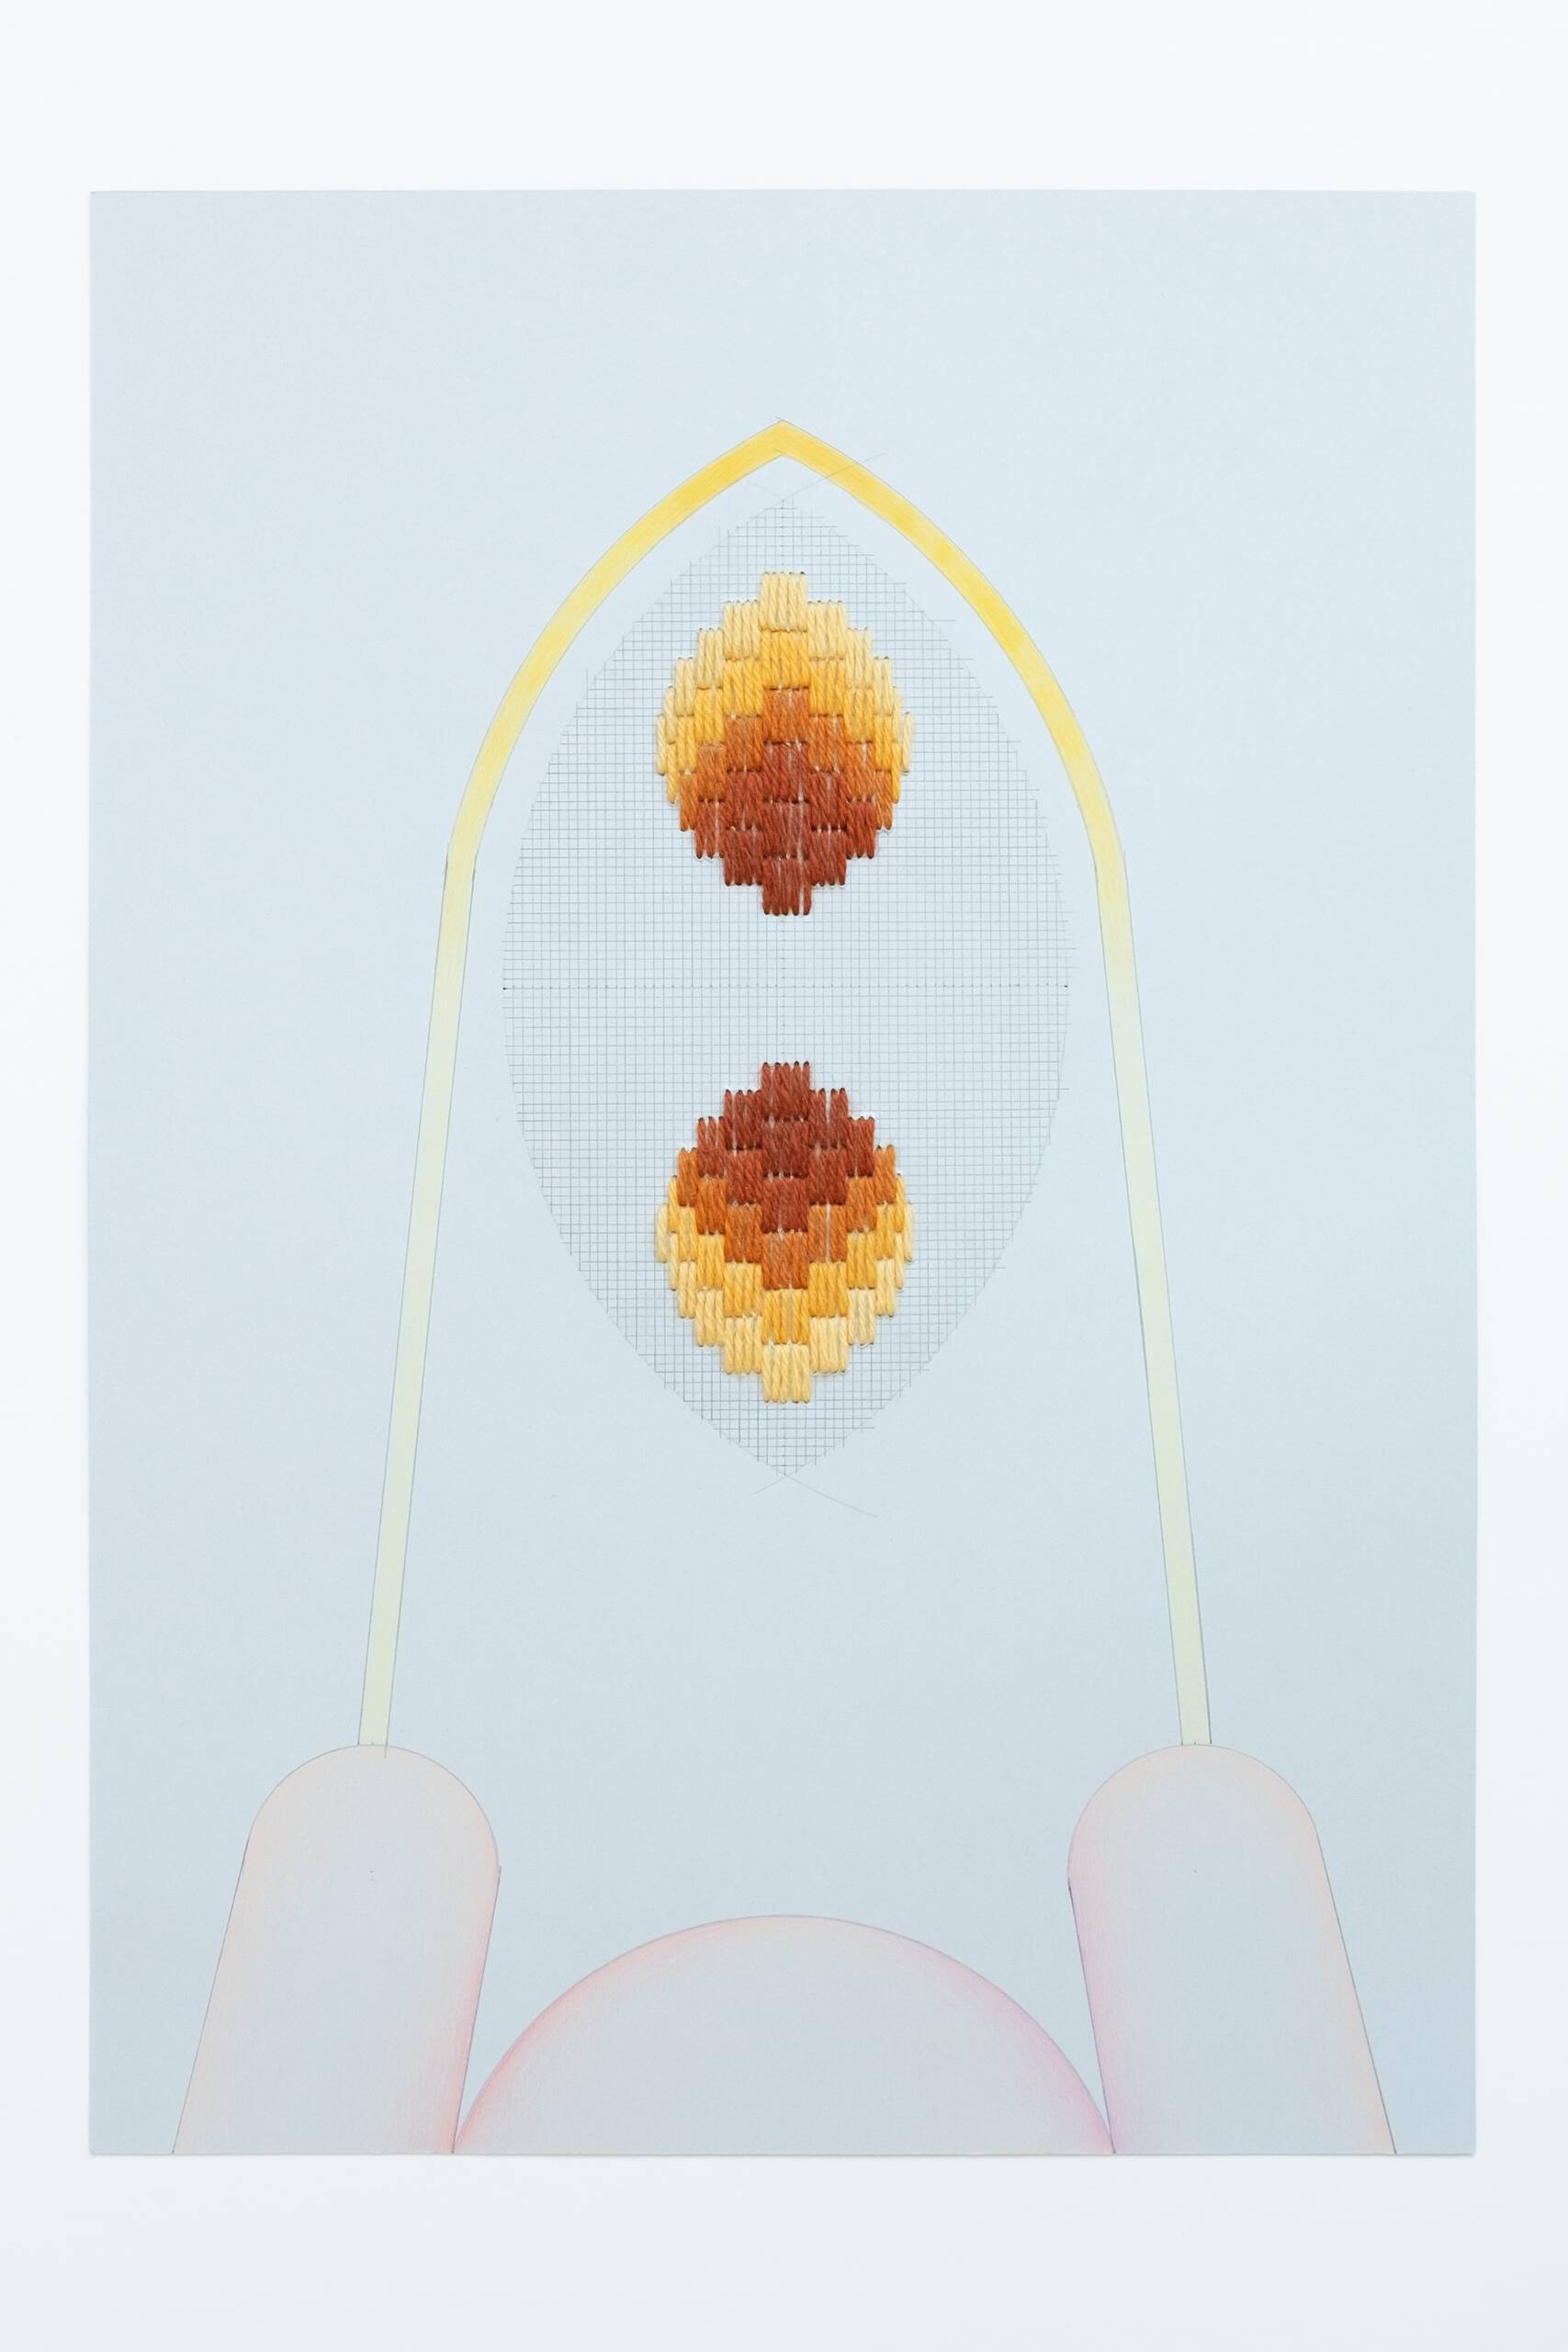 Bargello vesica piscis [yellow-orange on blue], Hand-embroidered wool, pencil and colored pencil on paper, 2020